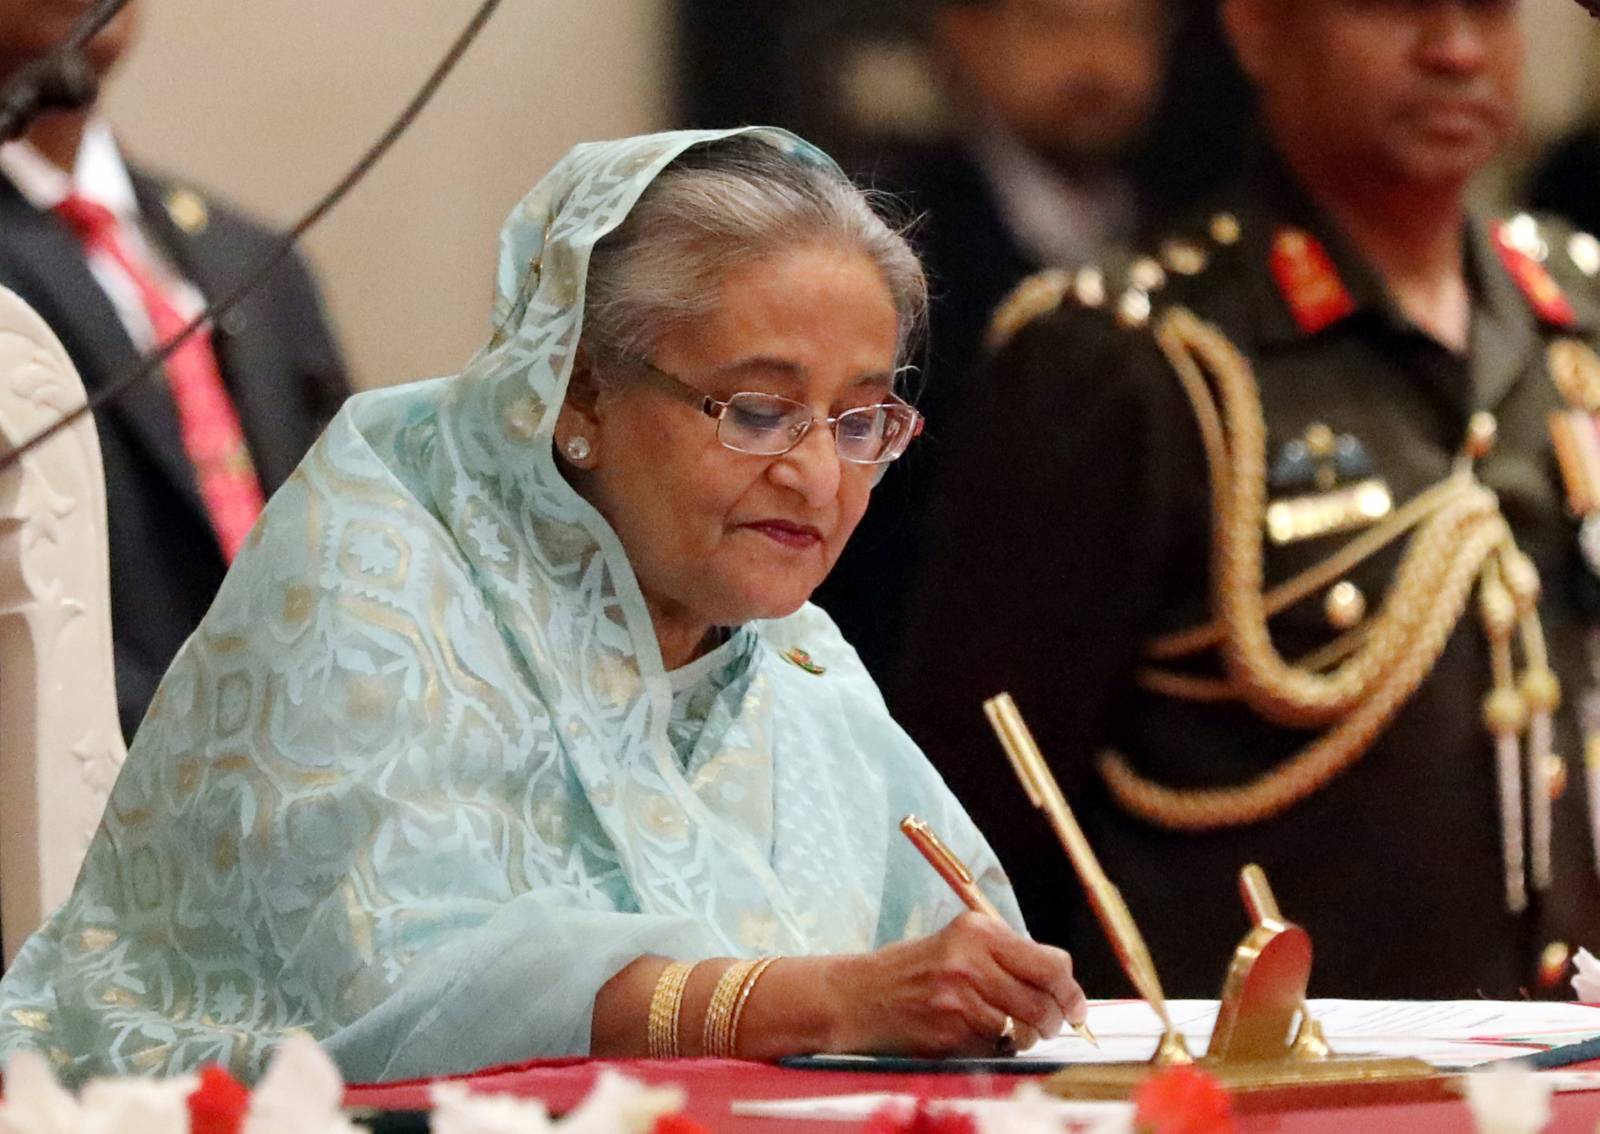 Sheikh Hasina signs the official oath book after taking oath as the Prime Minister for the third consecutive time in Dhaka